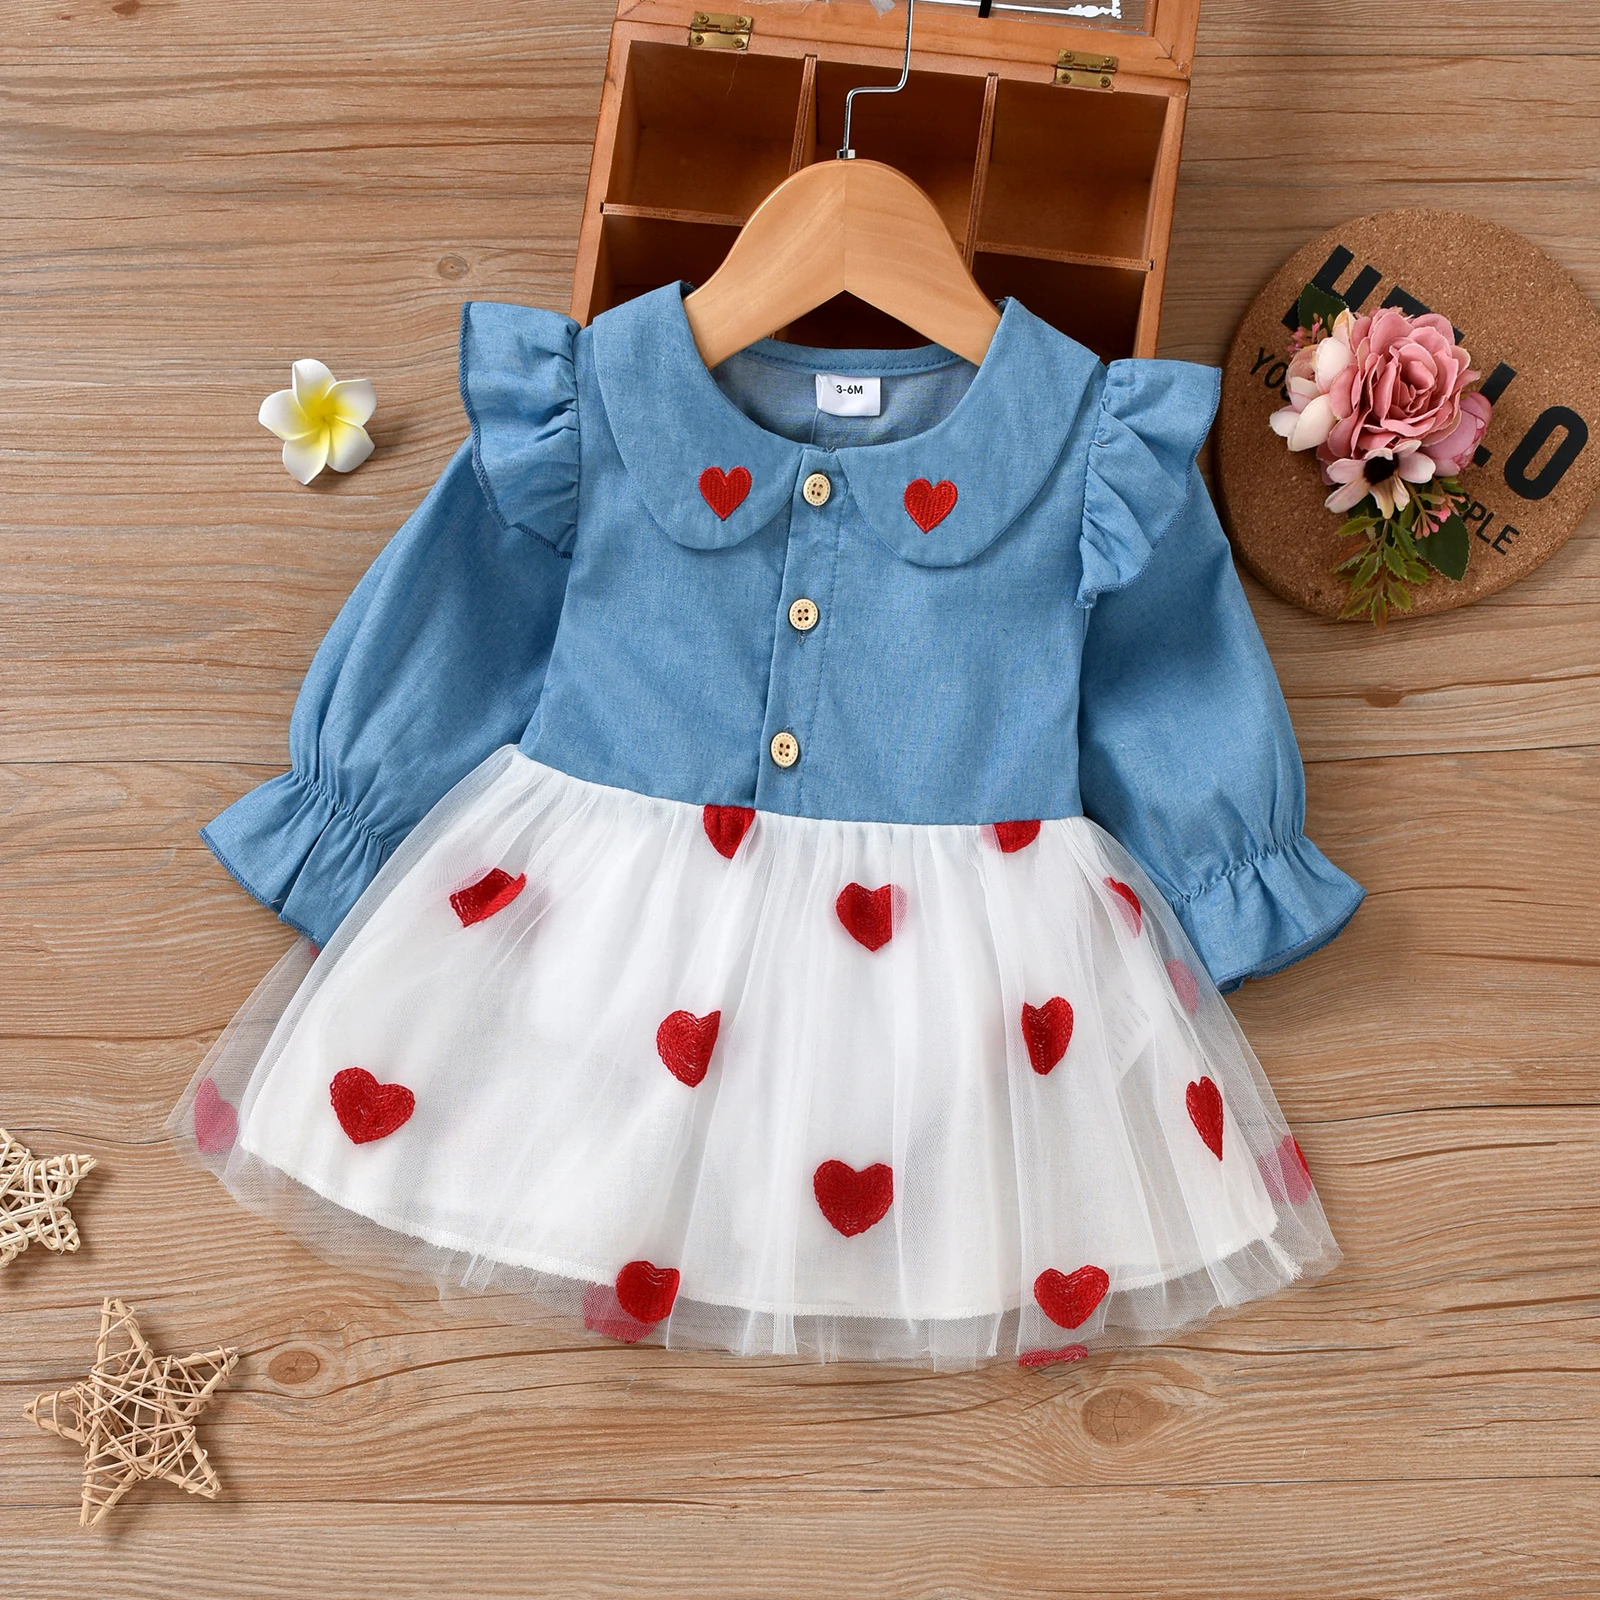 Princess Baby Girls Lovely Dress Toddler Casual Mesh Lace Long Sleee Ruffles Dress Children 0-3 Years Outfits Demin Clothes